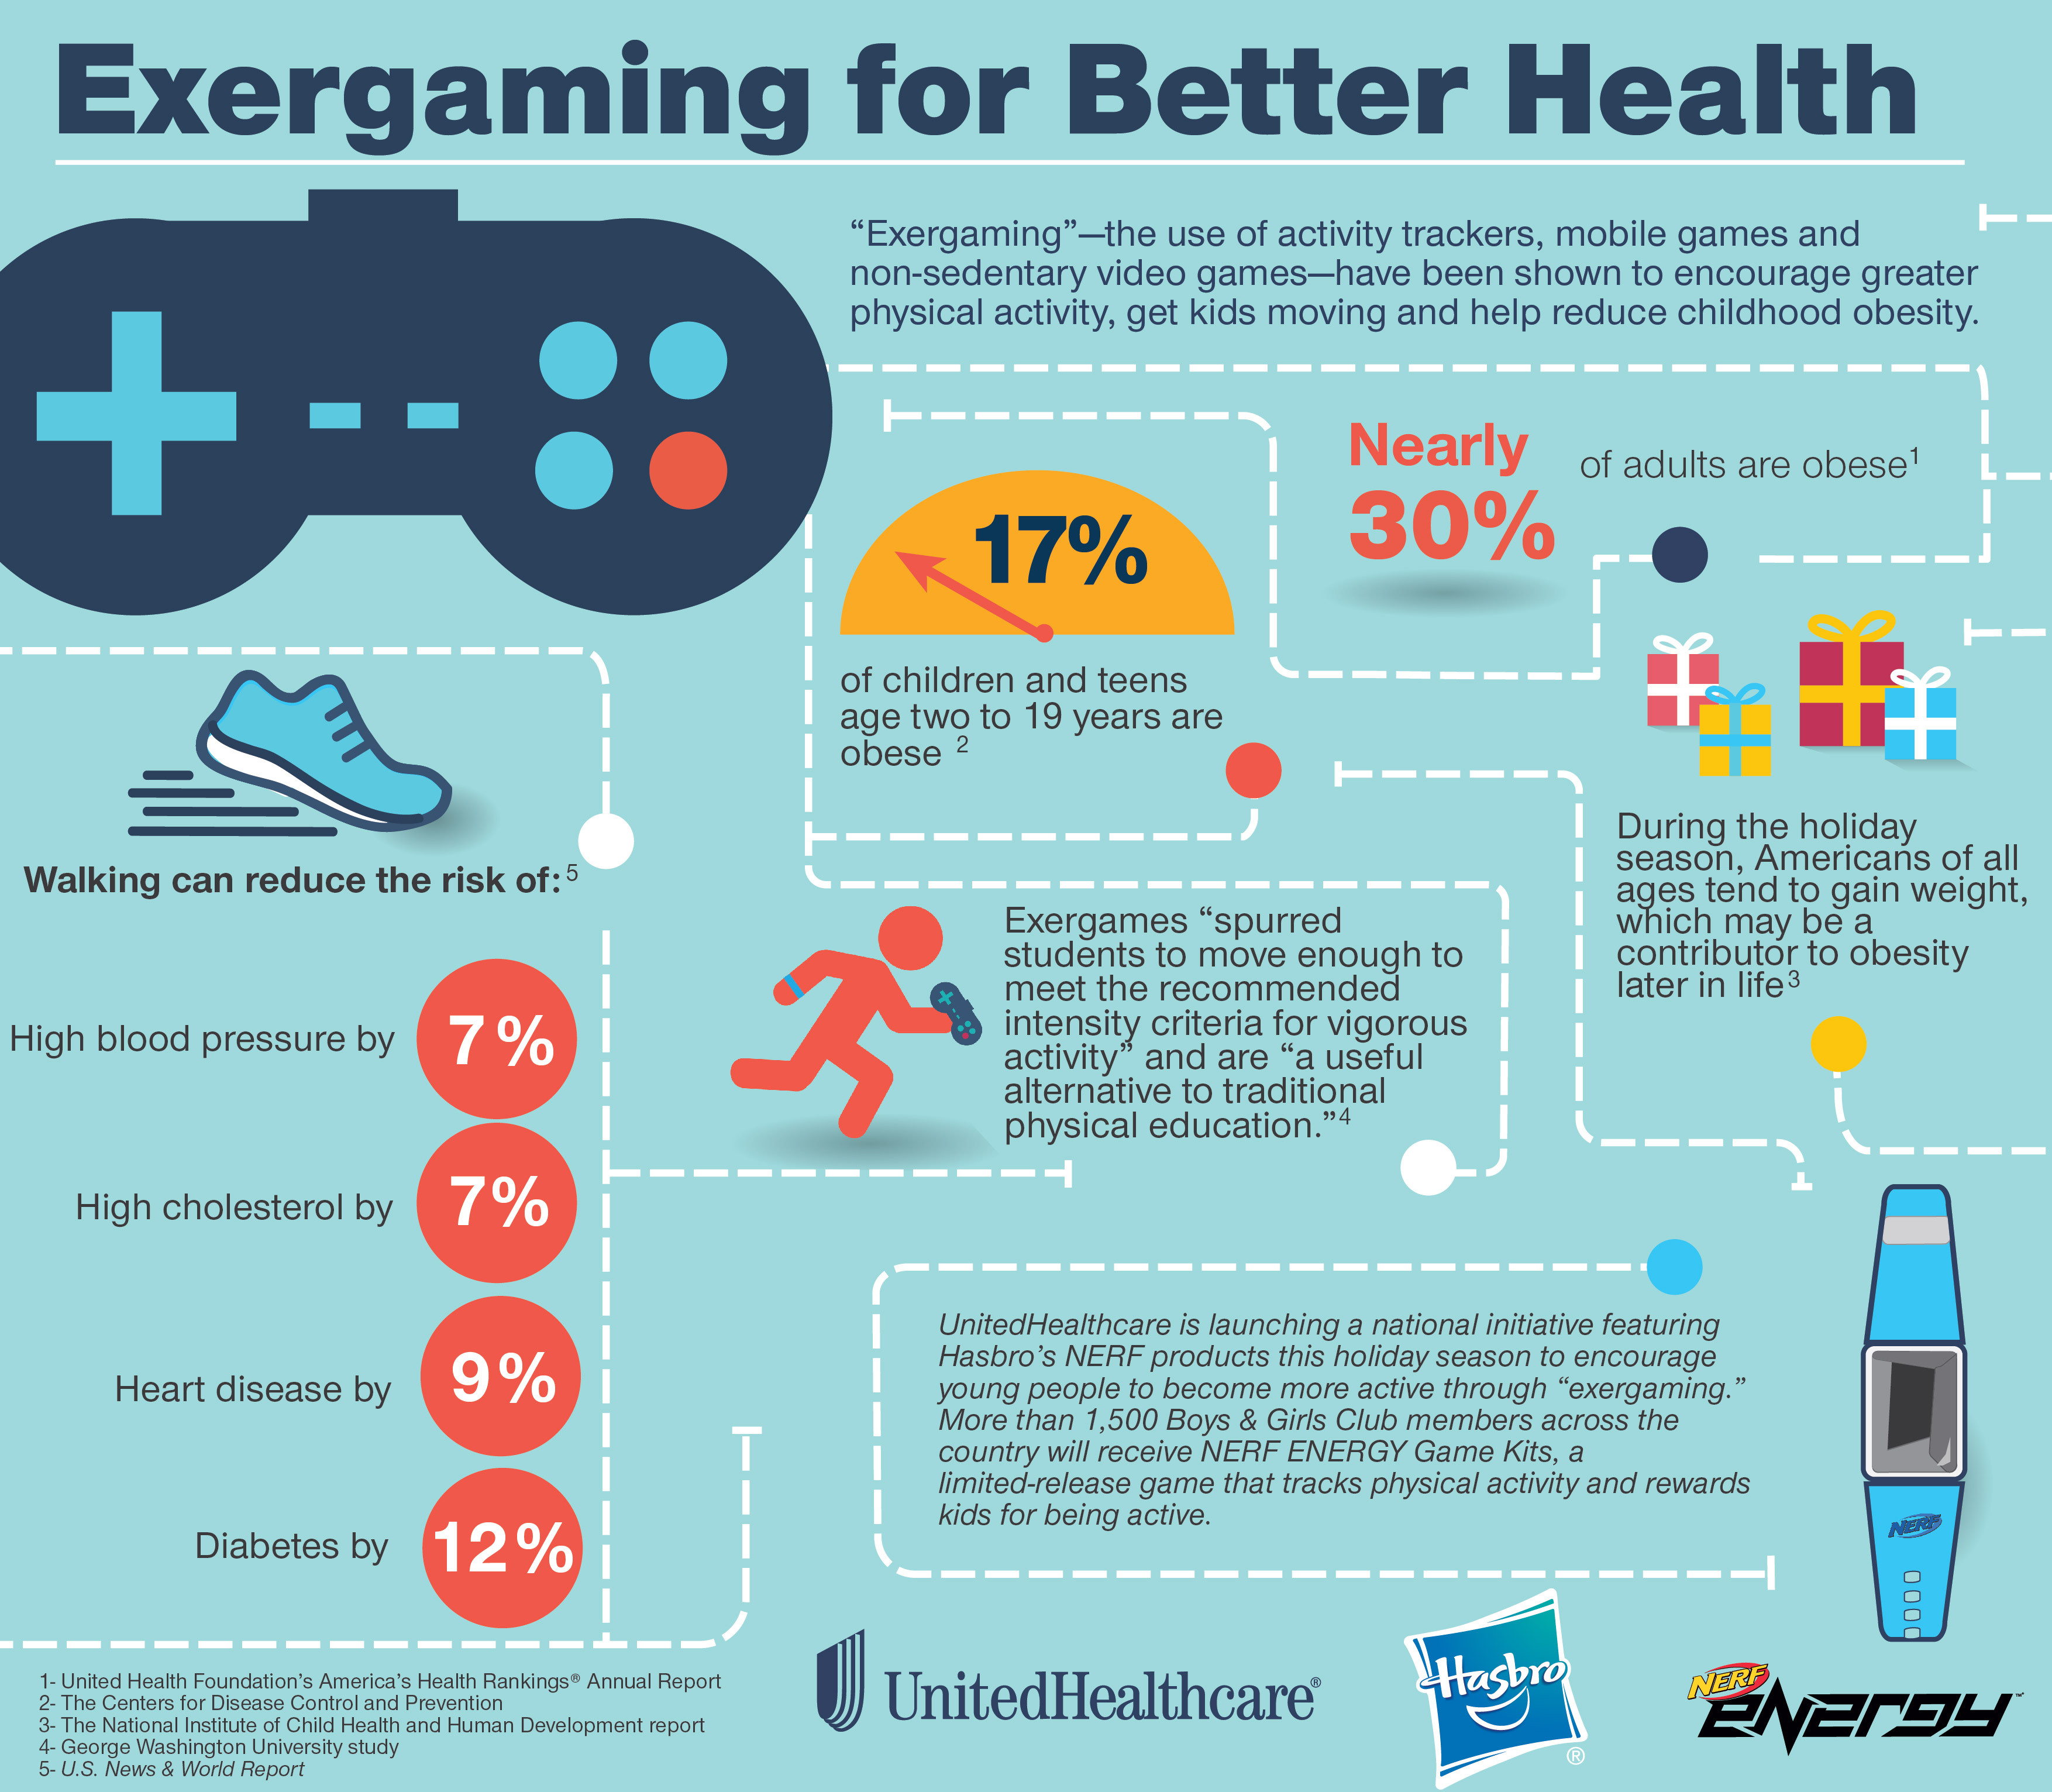 Healthy video gaming for children & teens